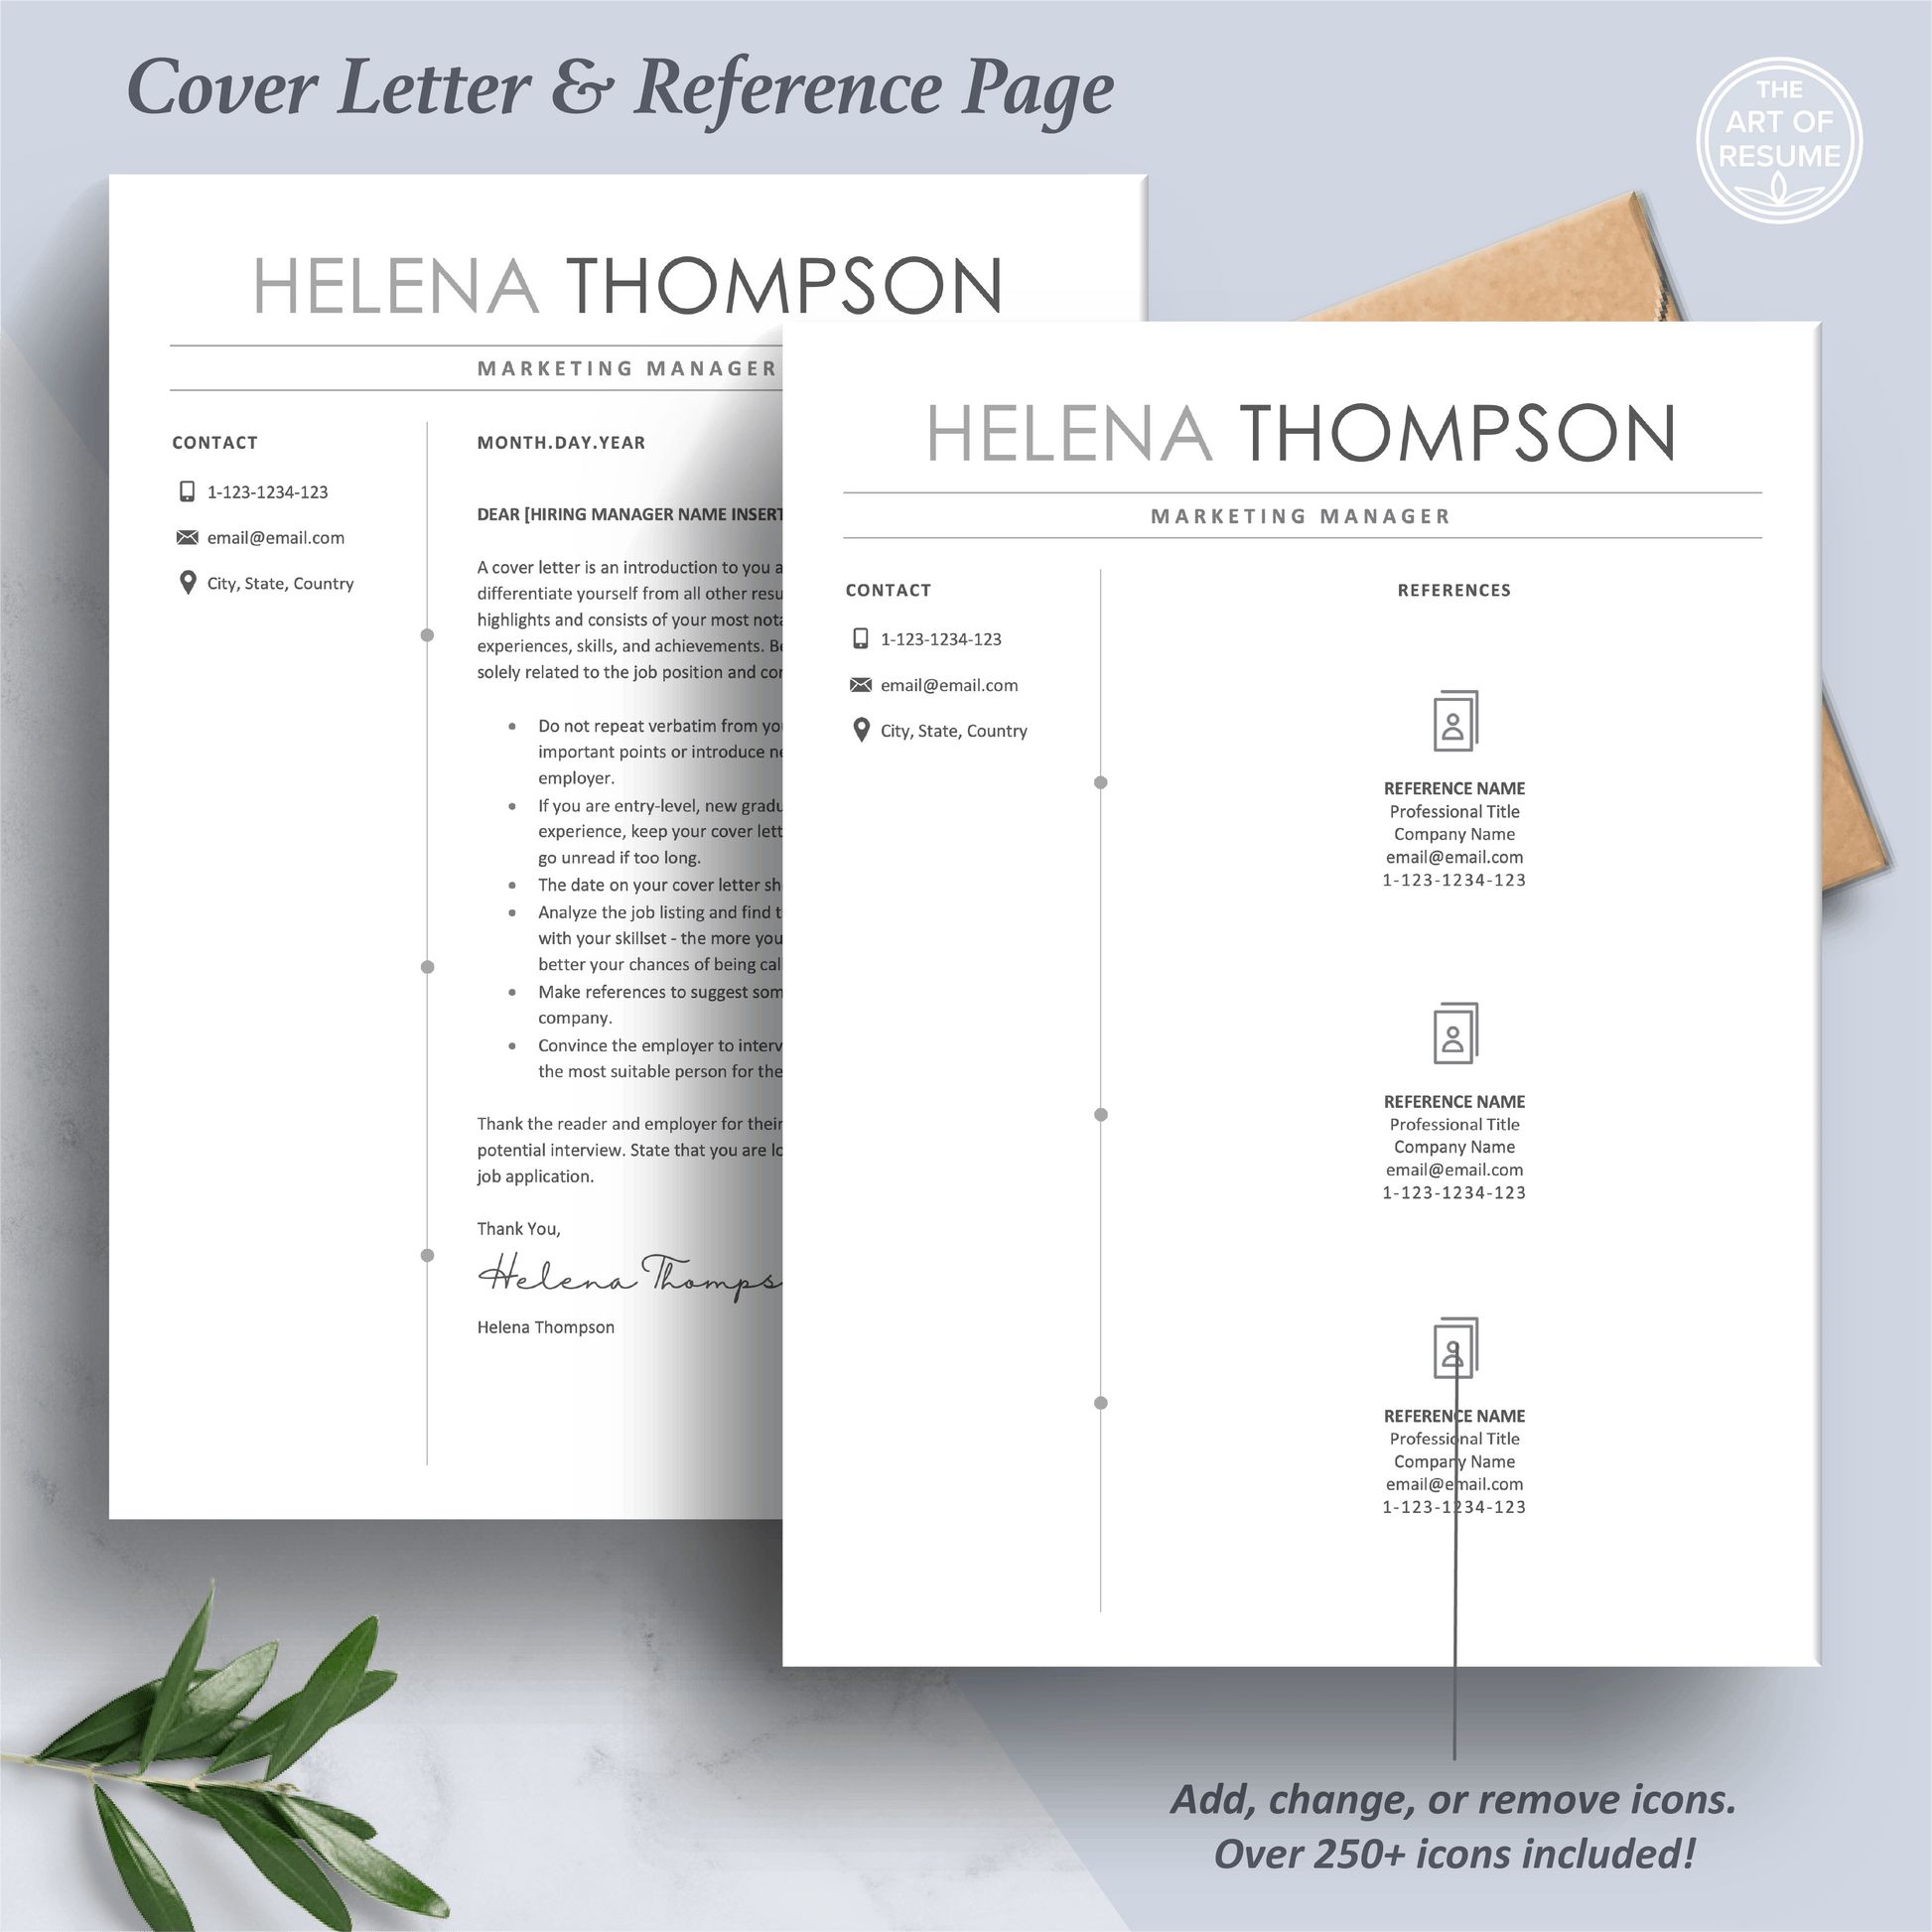 The Art of Resume Templates | Professional Simple Cover Letter and Reference Page Design Templates Instant Download